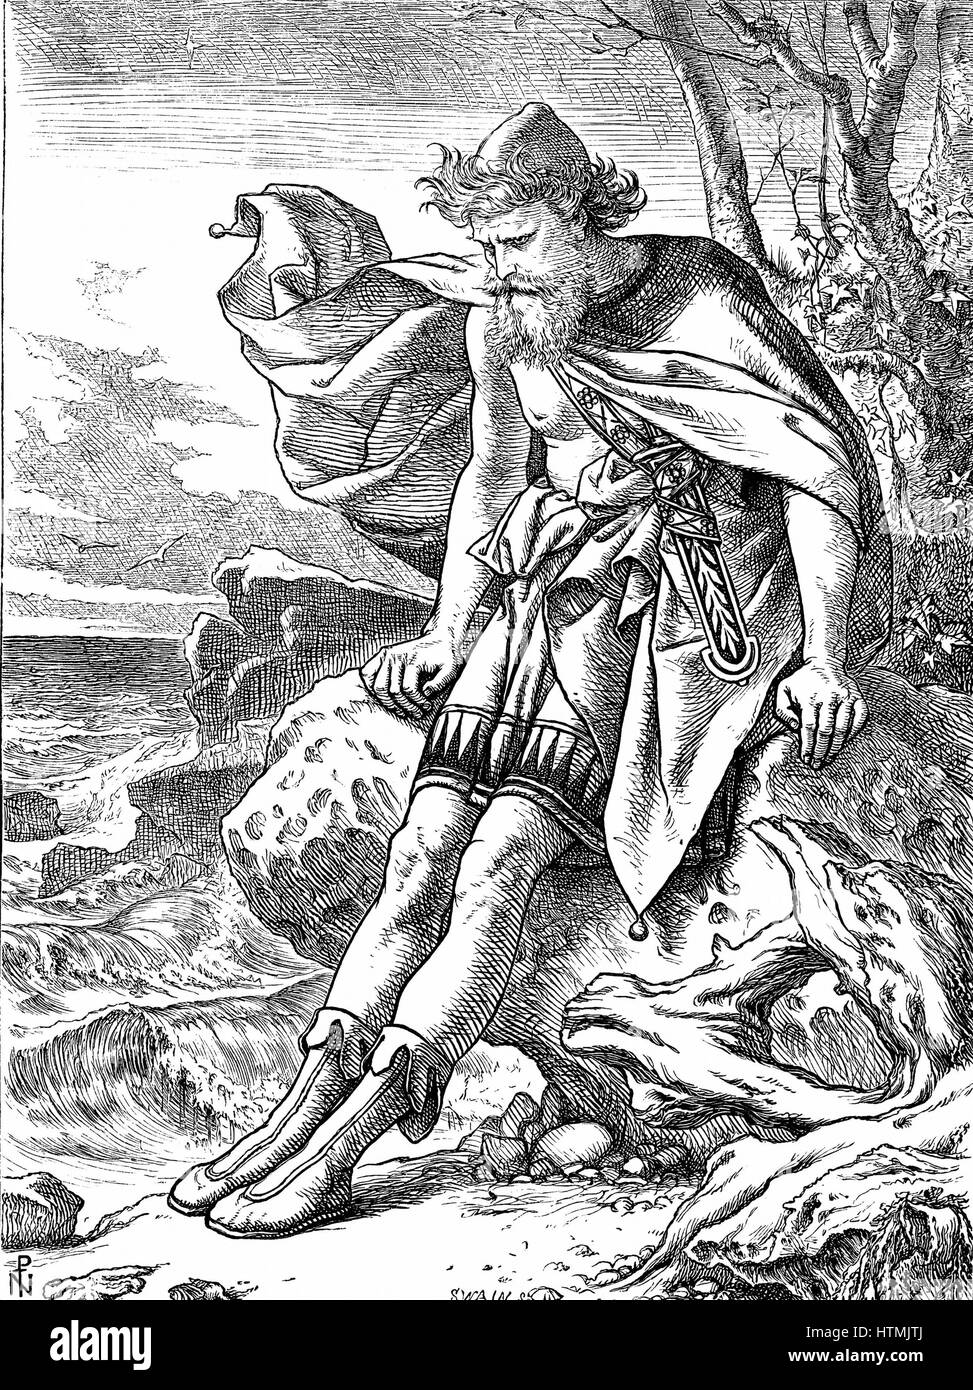 "Ulysses on Ogygia". Ulysses, mythical king of Ithaca, hero of Homer's "Odyssey" (Odysseus). Illustration by Joseph Noel Paton (1821-1901) for his own poem published London 1864. Paton was the original illustrator of Charles Kingsley "The Water Babies" Stock Photo